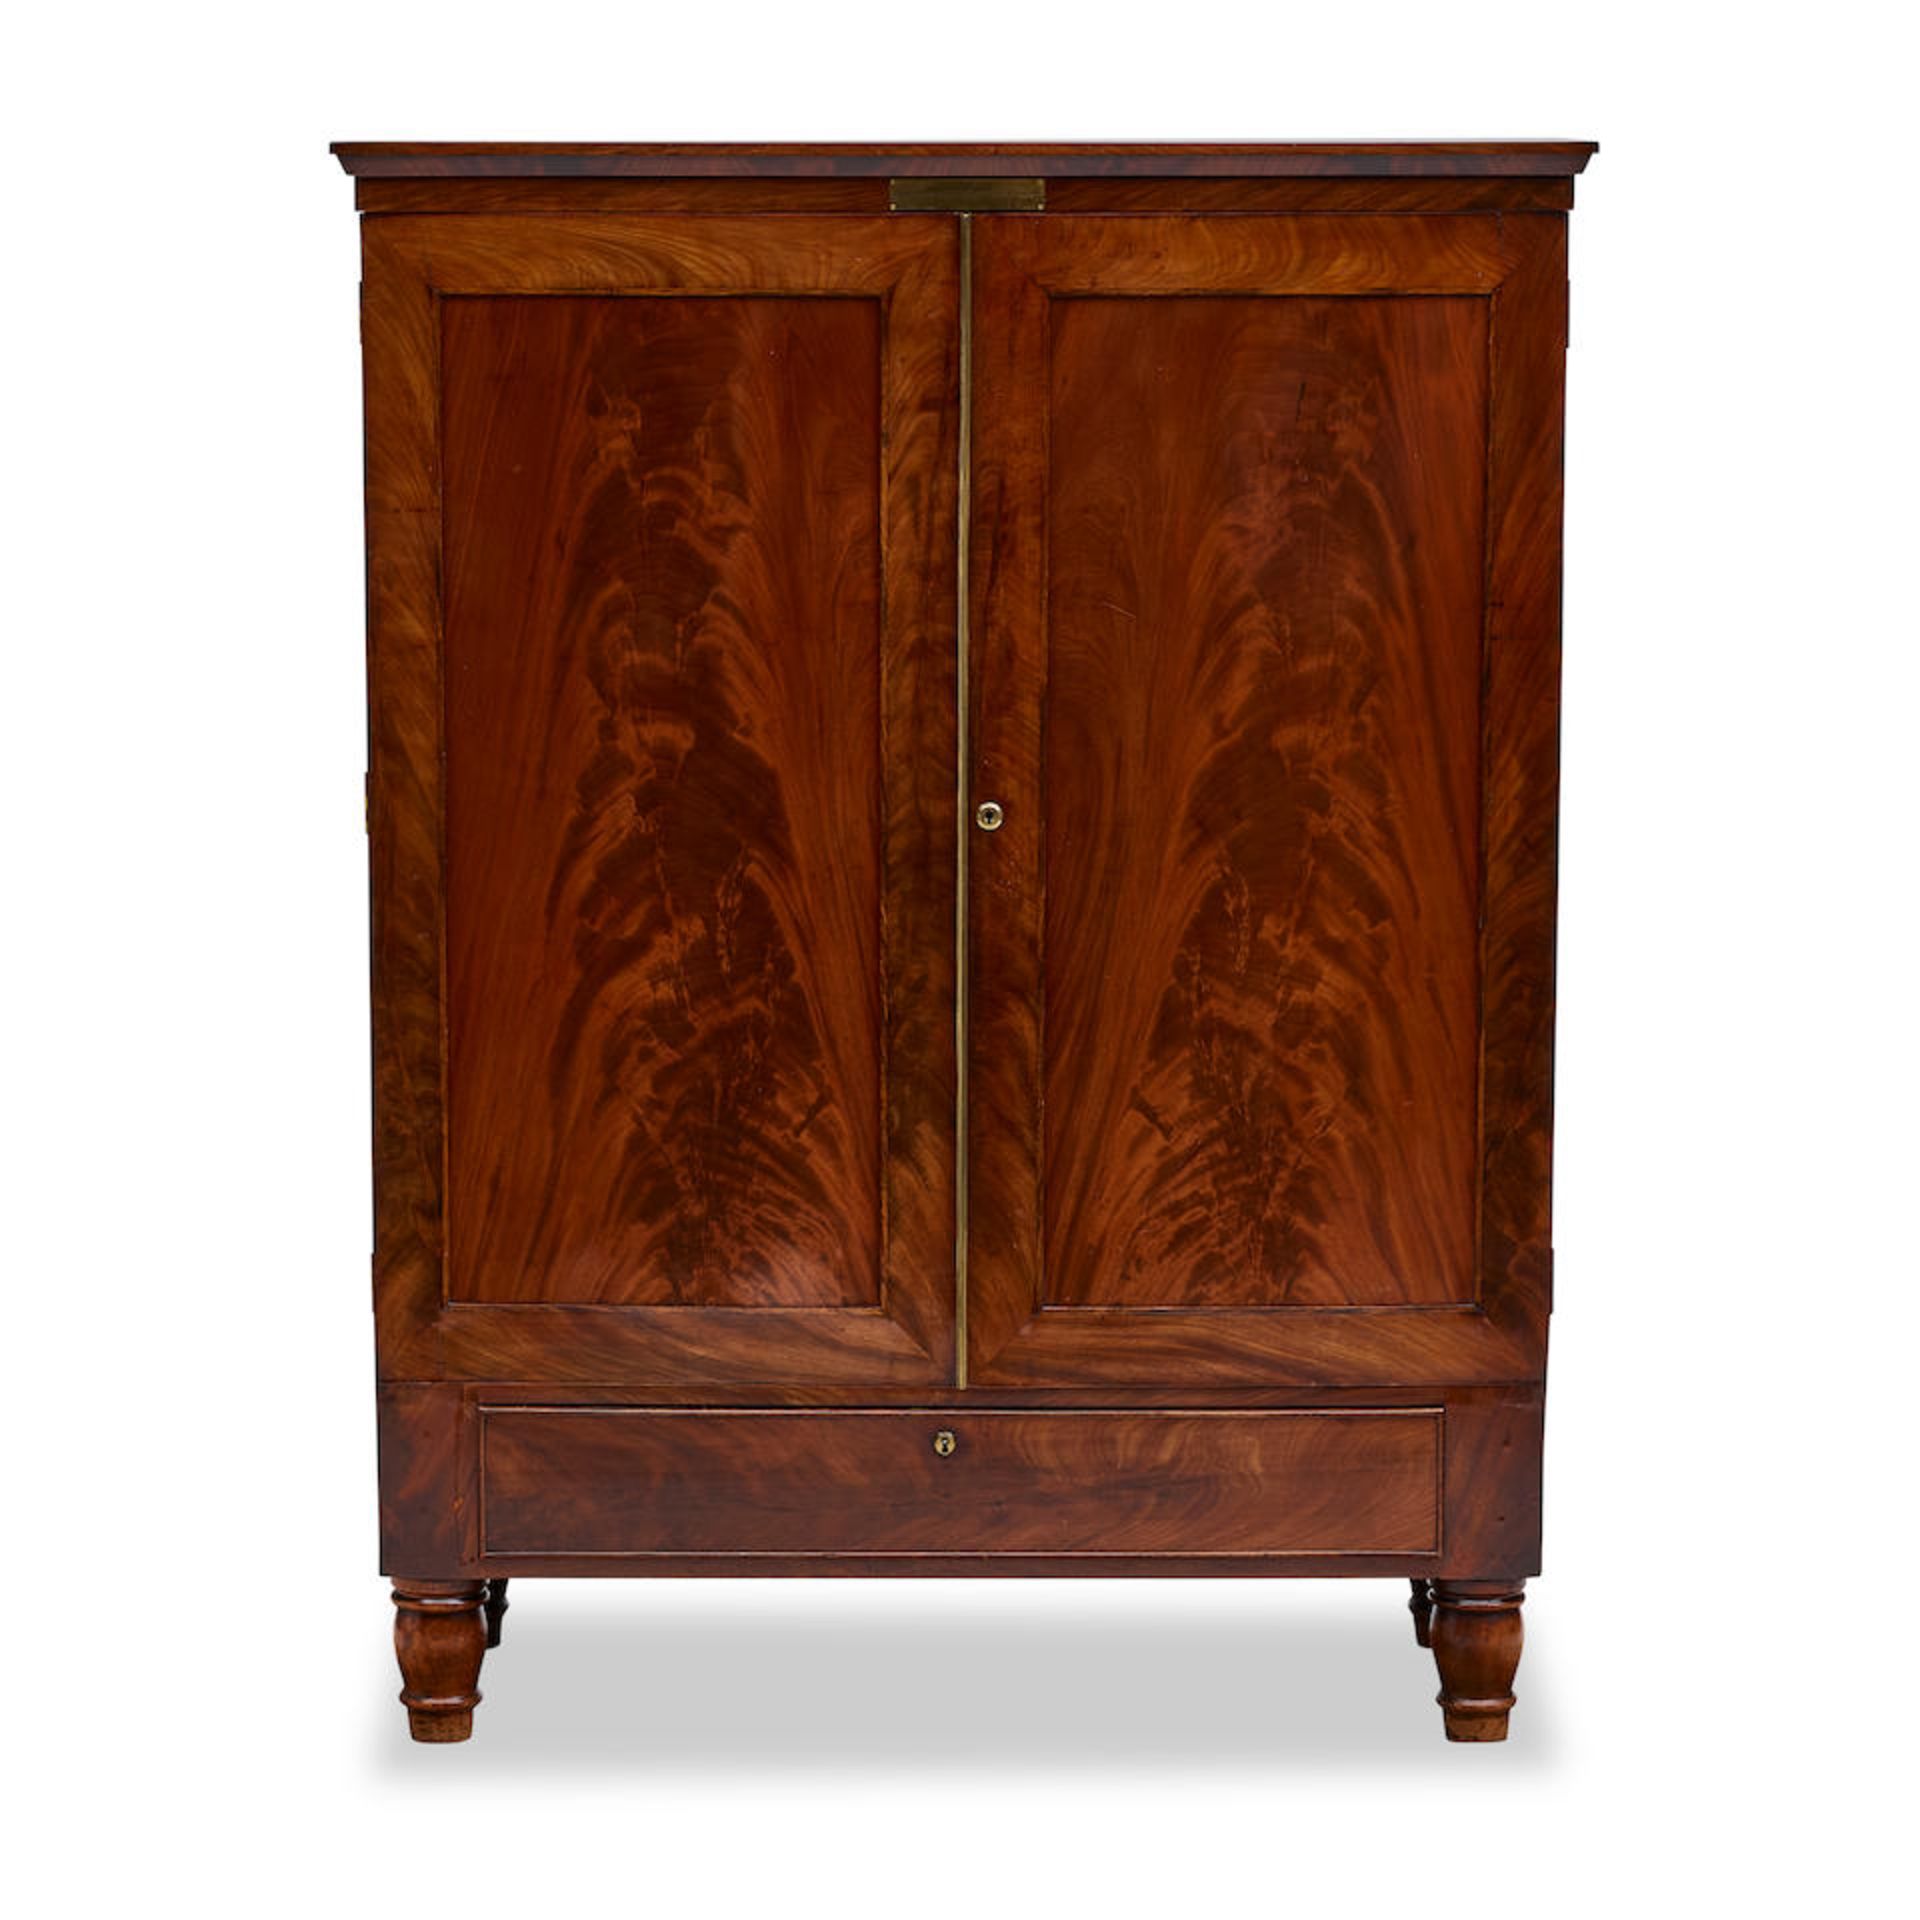 AN ENGLISH MAHOGANY COLLECTOR'S CABINET19th century